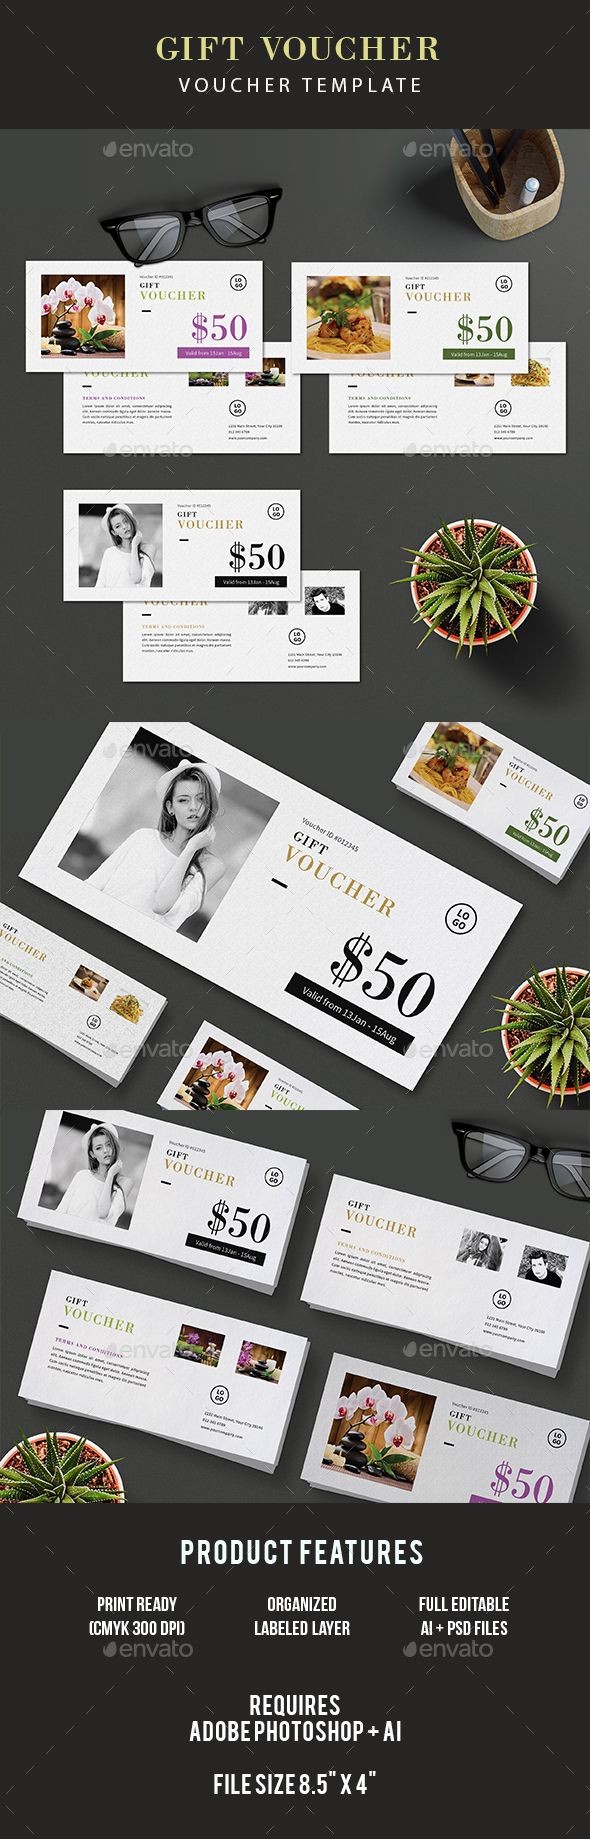 Pin By Best Graphic Design On Gift Voucher Templates Pinterest Certificate Template Ai